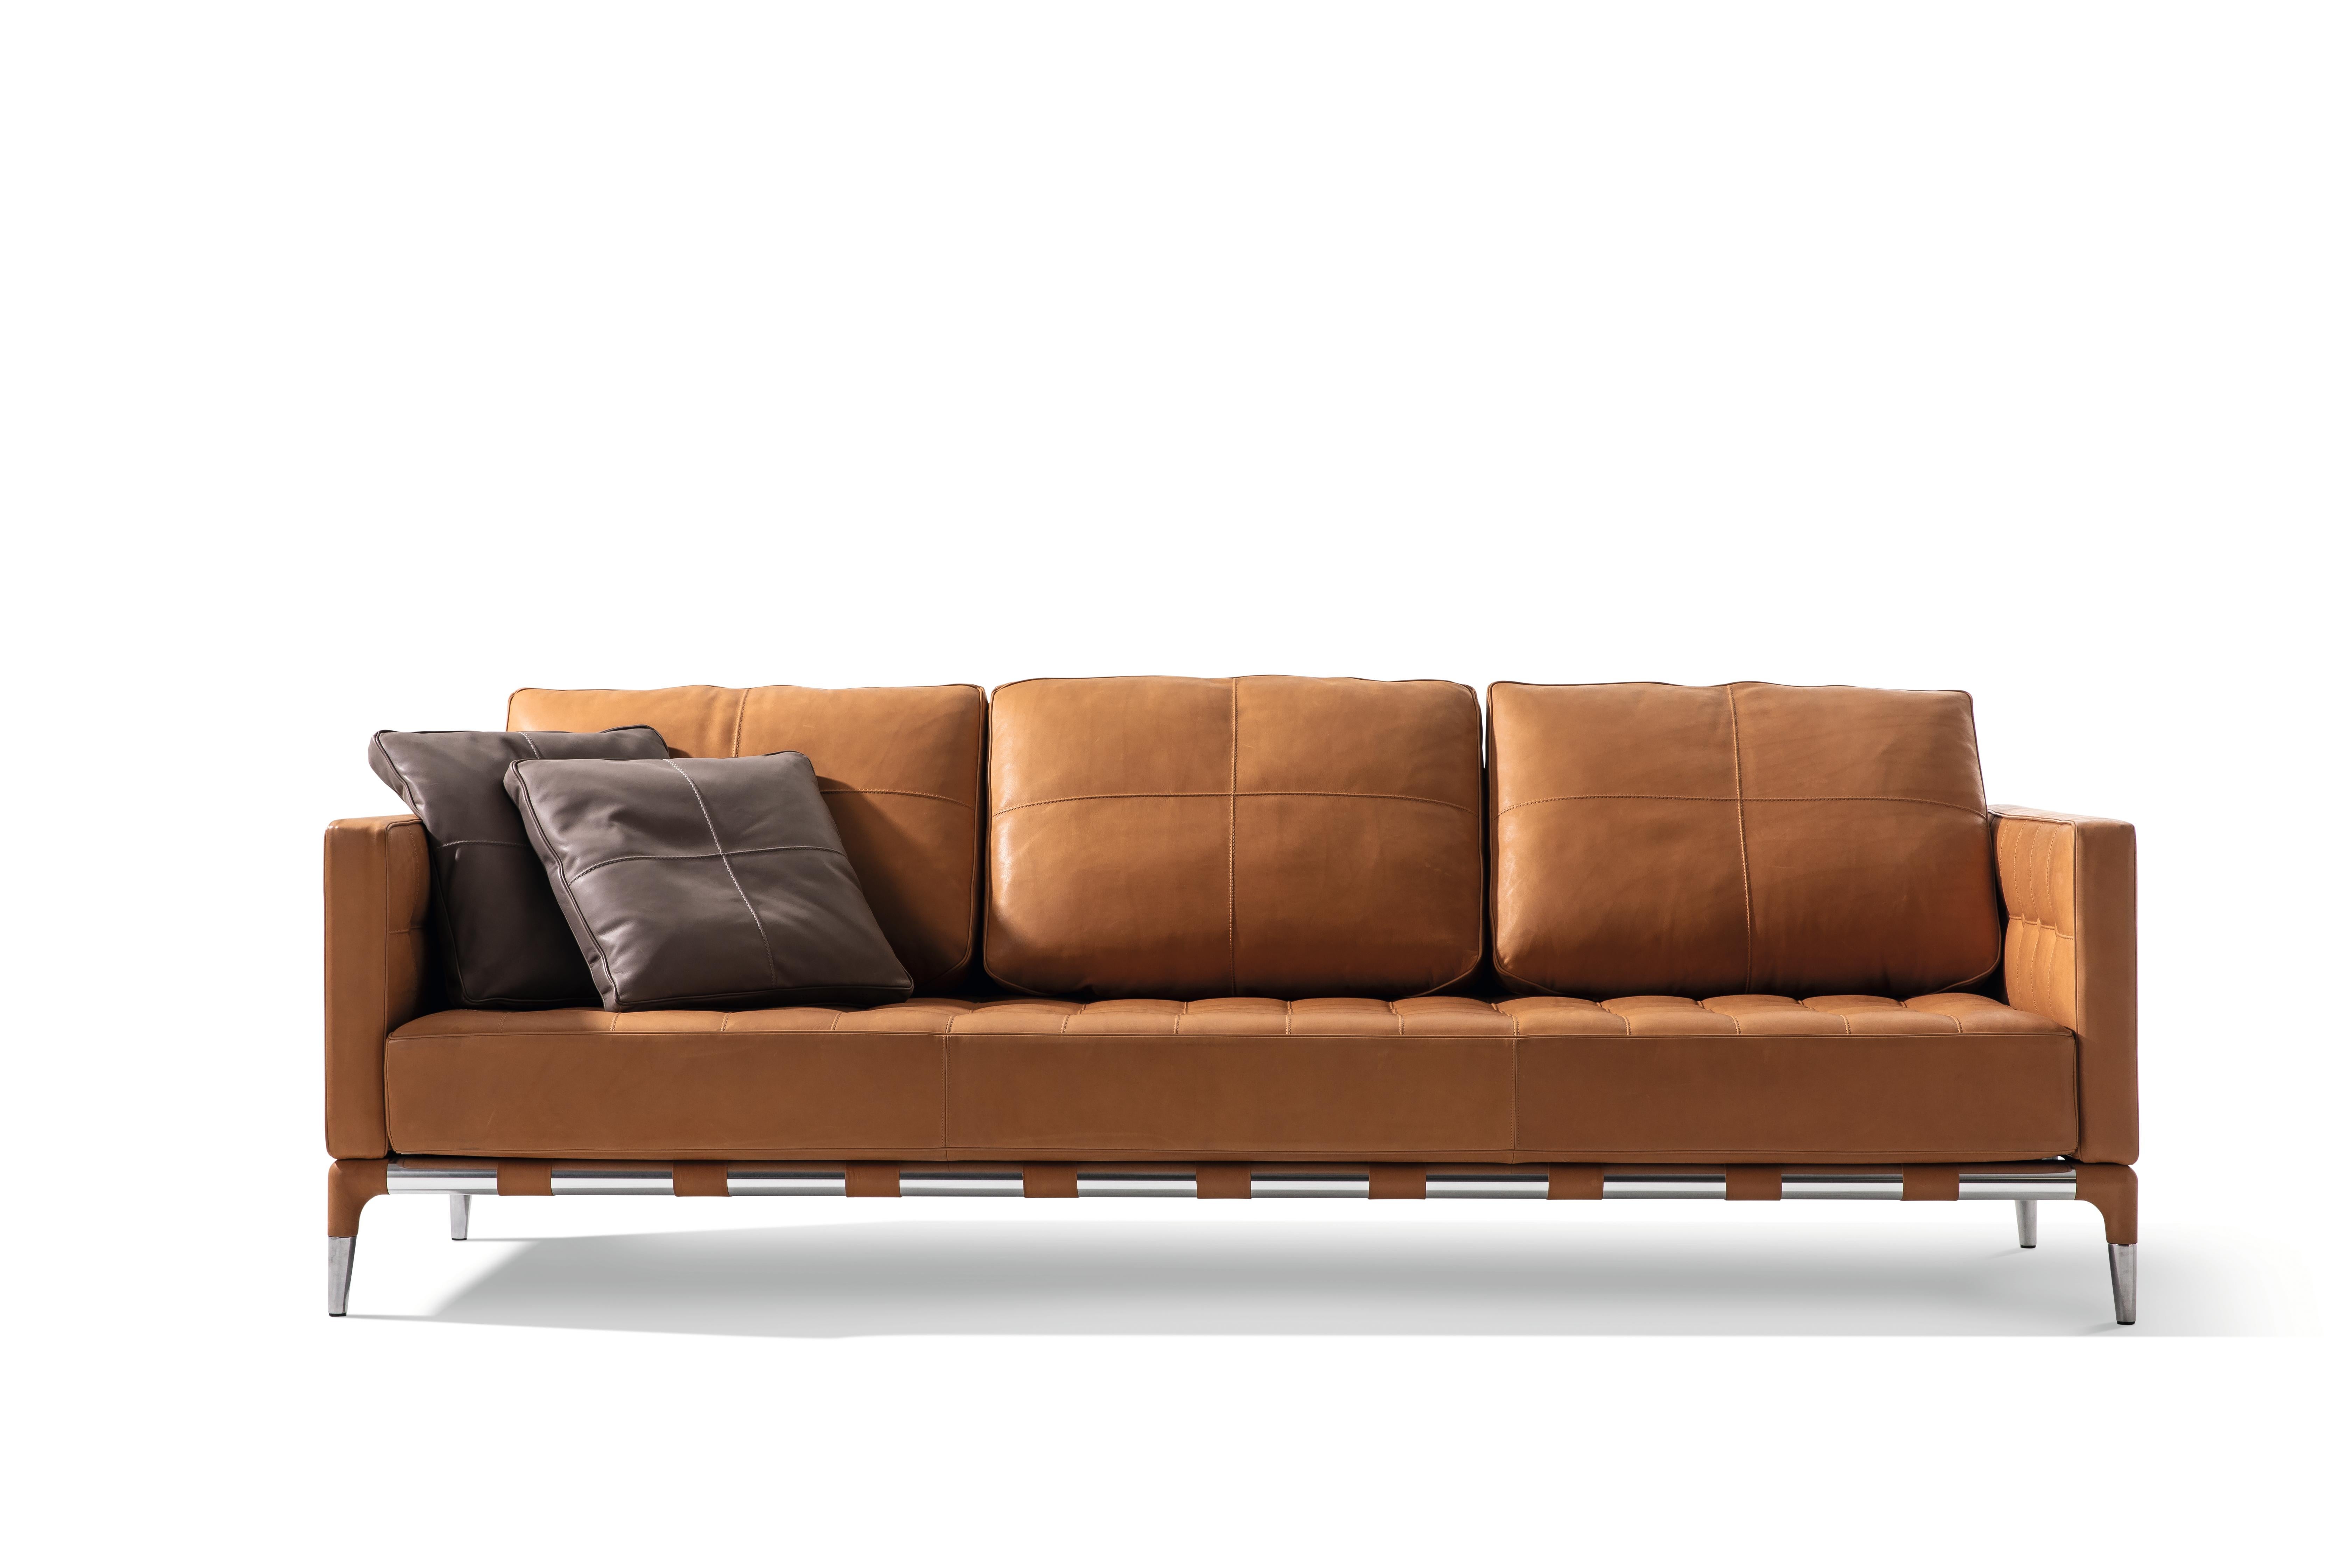 Steel And Leather Sofa model 'Prive' designed by Phillipe Stark.
Manufactured by Cassina (Italy)

Complex and formal in its design, the Privé collection perfectly combines style and transgression, merging to create an appealing mix of classicism,